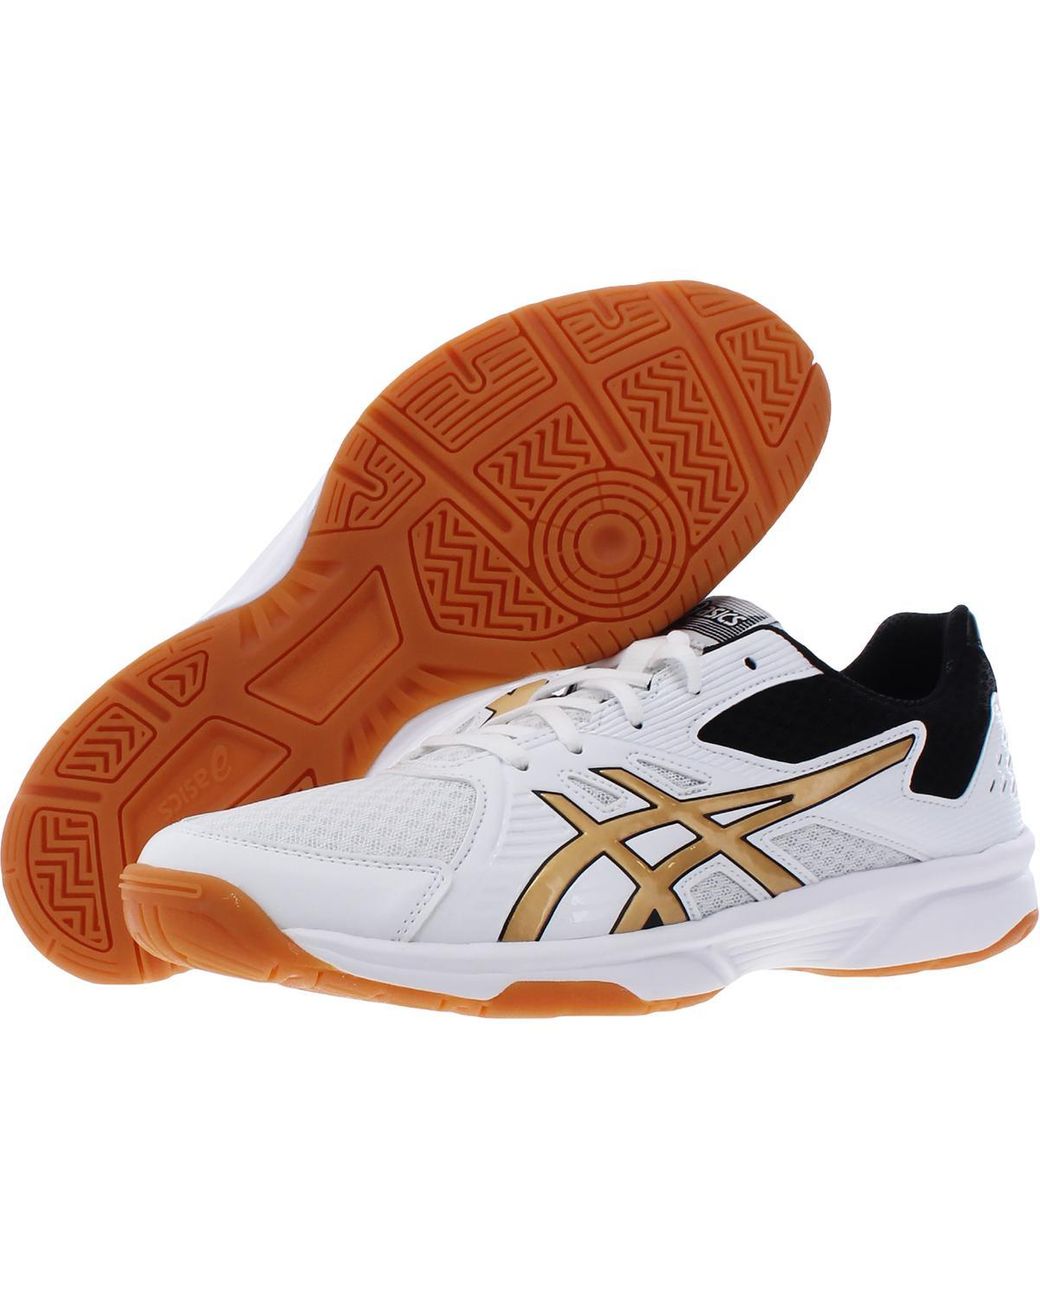 Asics Upcourt 3 Workout Performance Volleyball Shoes in White | Lyst